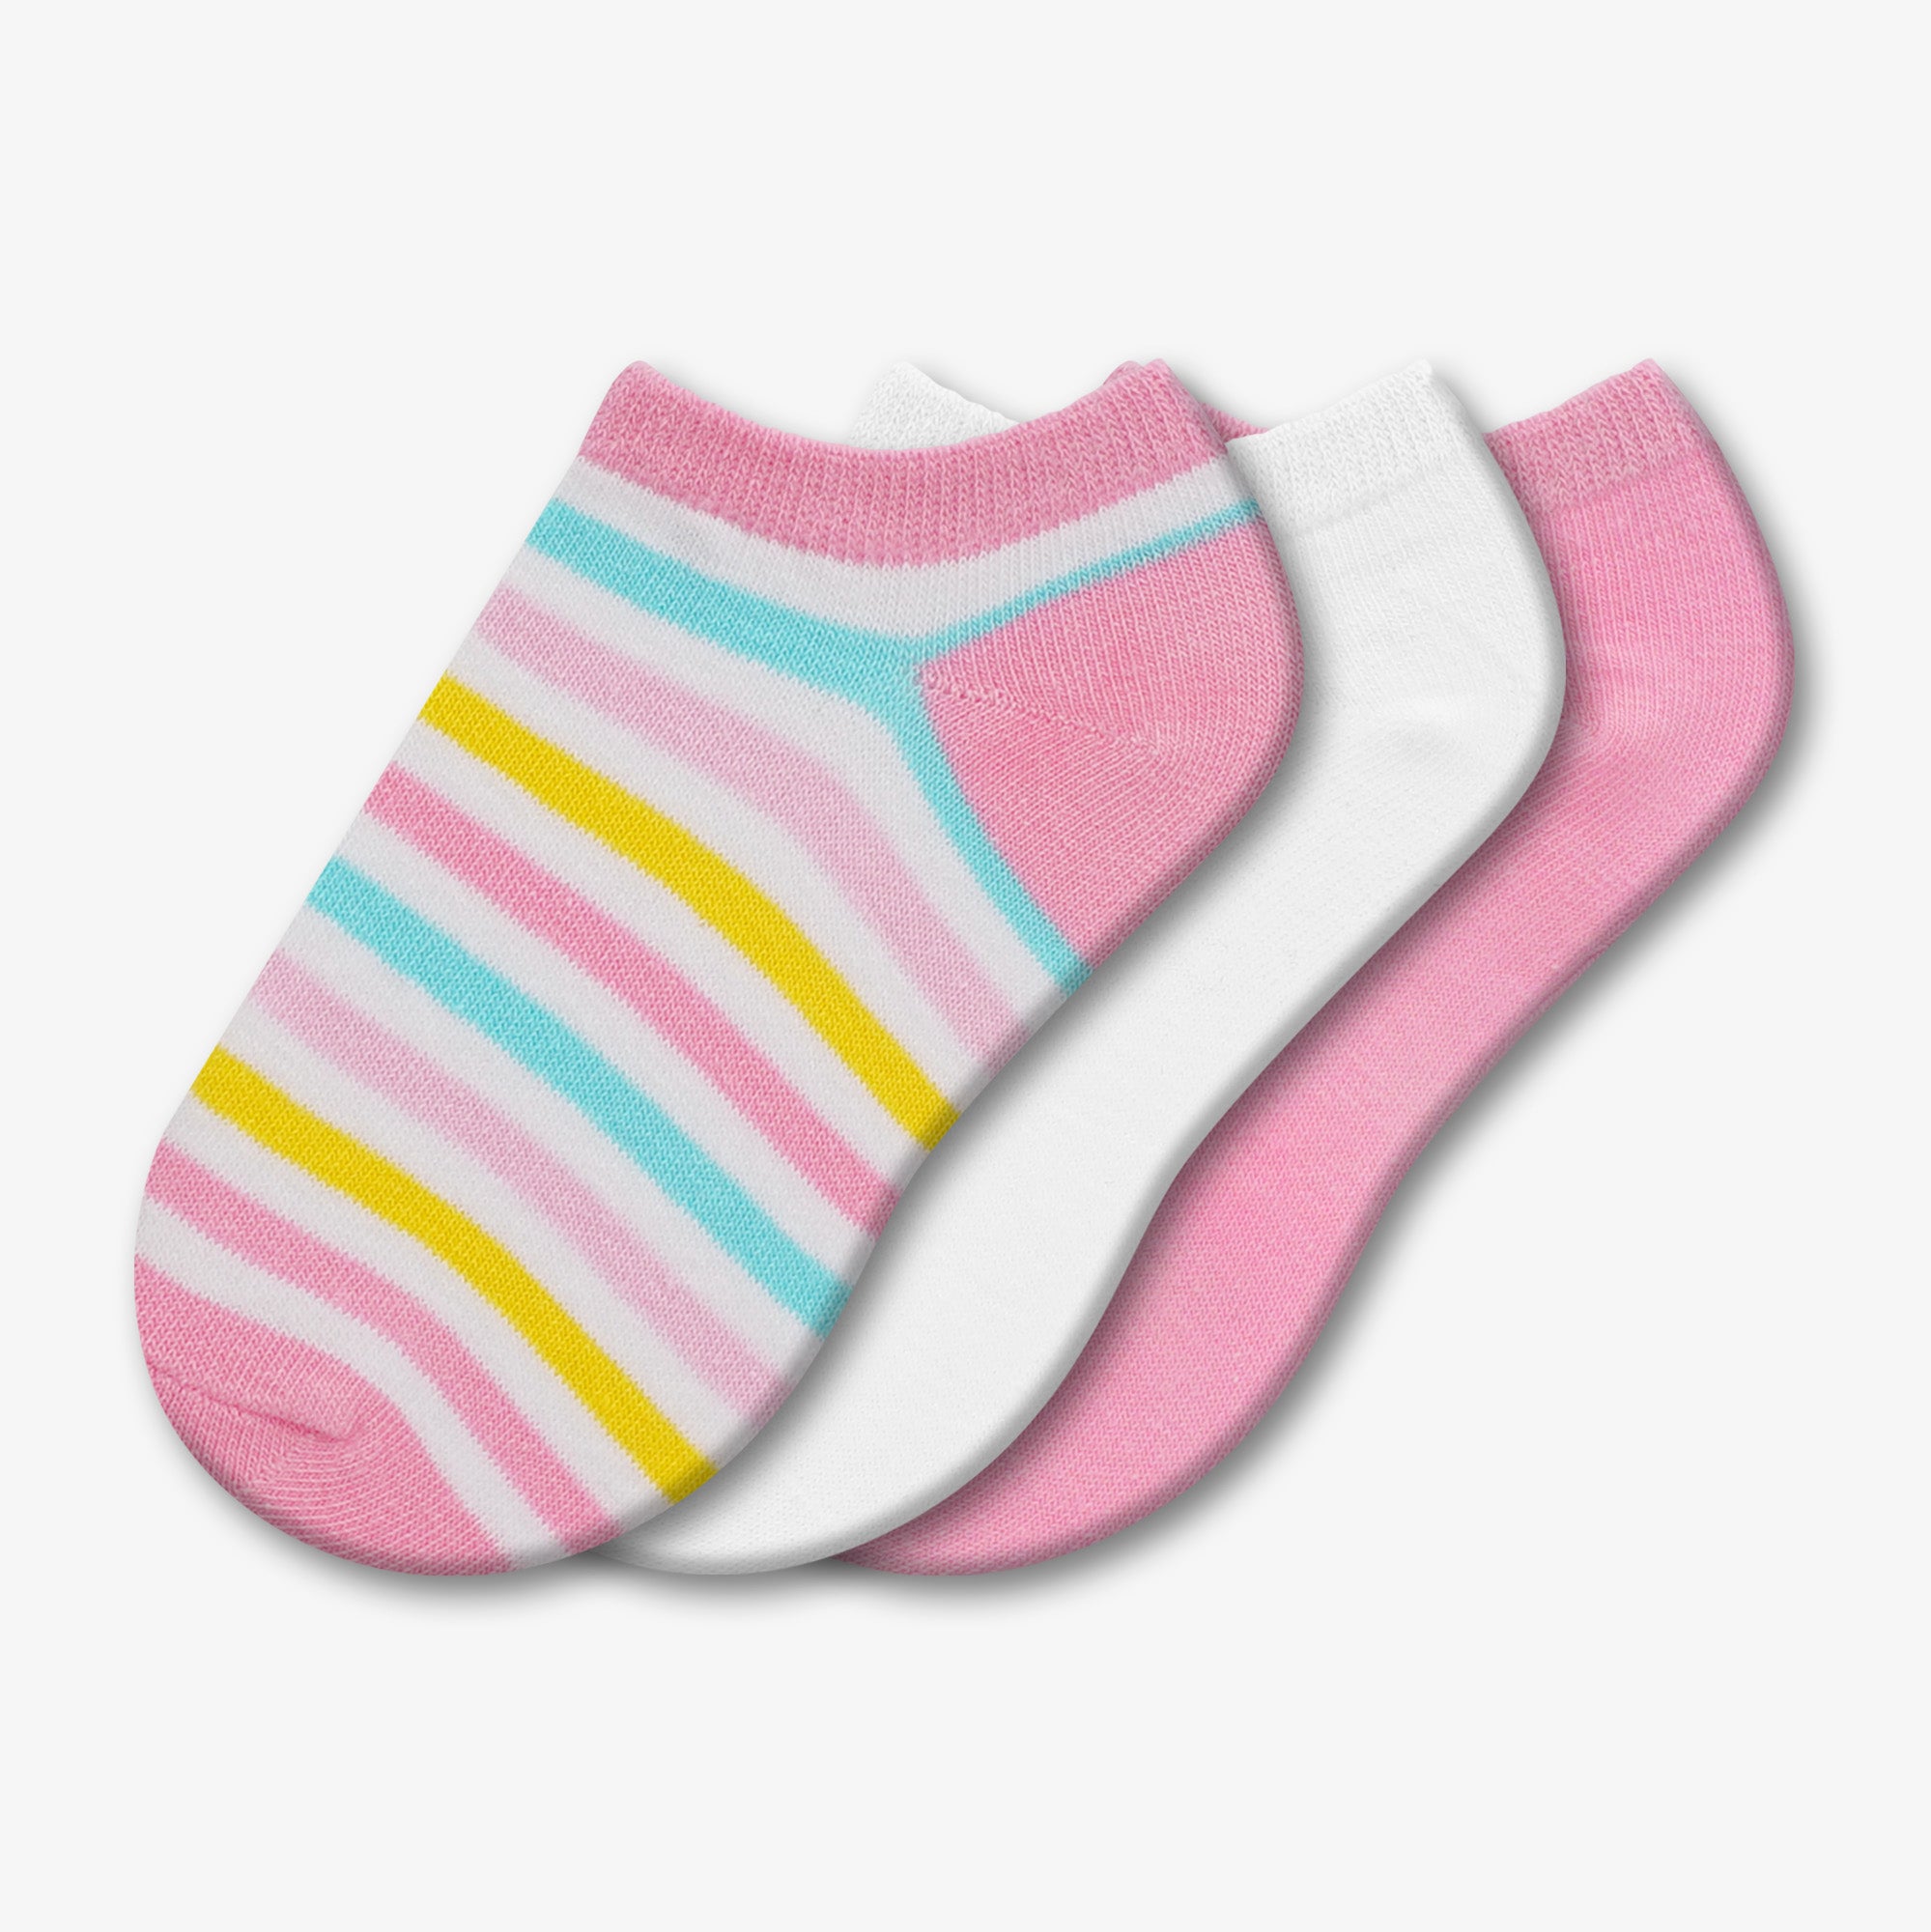 3 Pair Low Cut Socks - Assorted - Style: 616